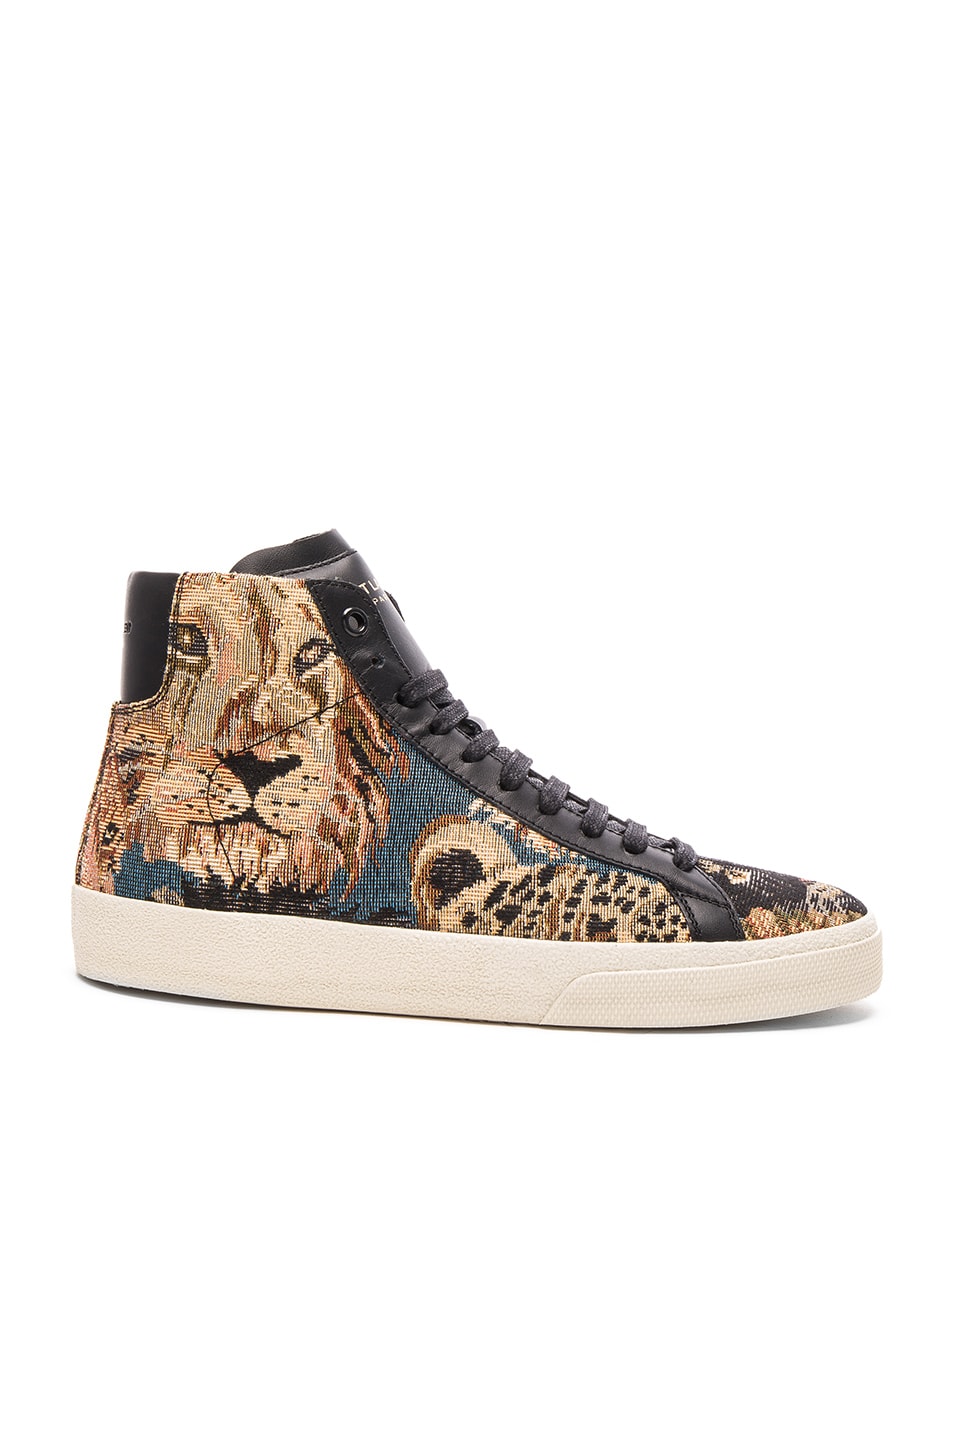 Image 1 of Saint Laurent Court Classic Beast Tapestry Sneakers in Black & Natural